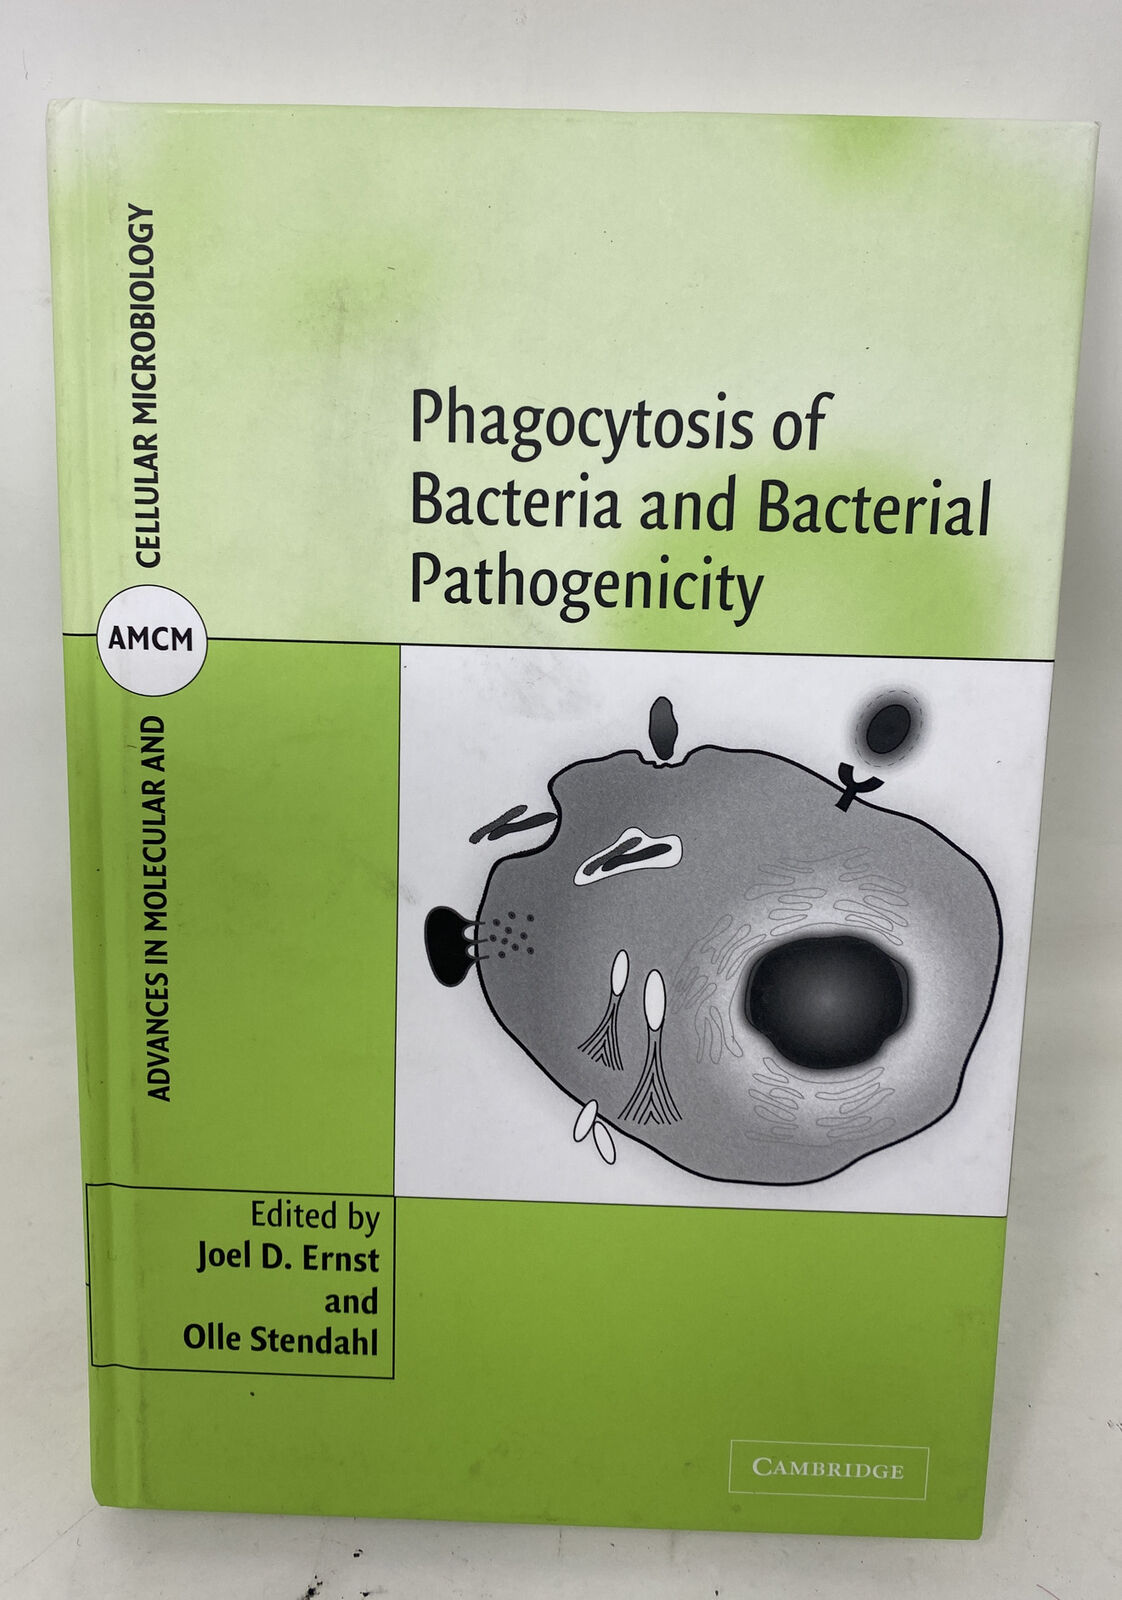 Phagocytosis of Bacteria and Bacterial Pathogenicity by MD Ernst, Joel D: New